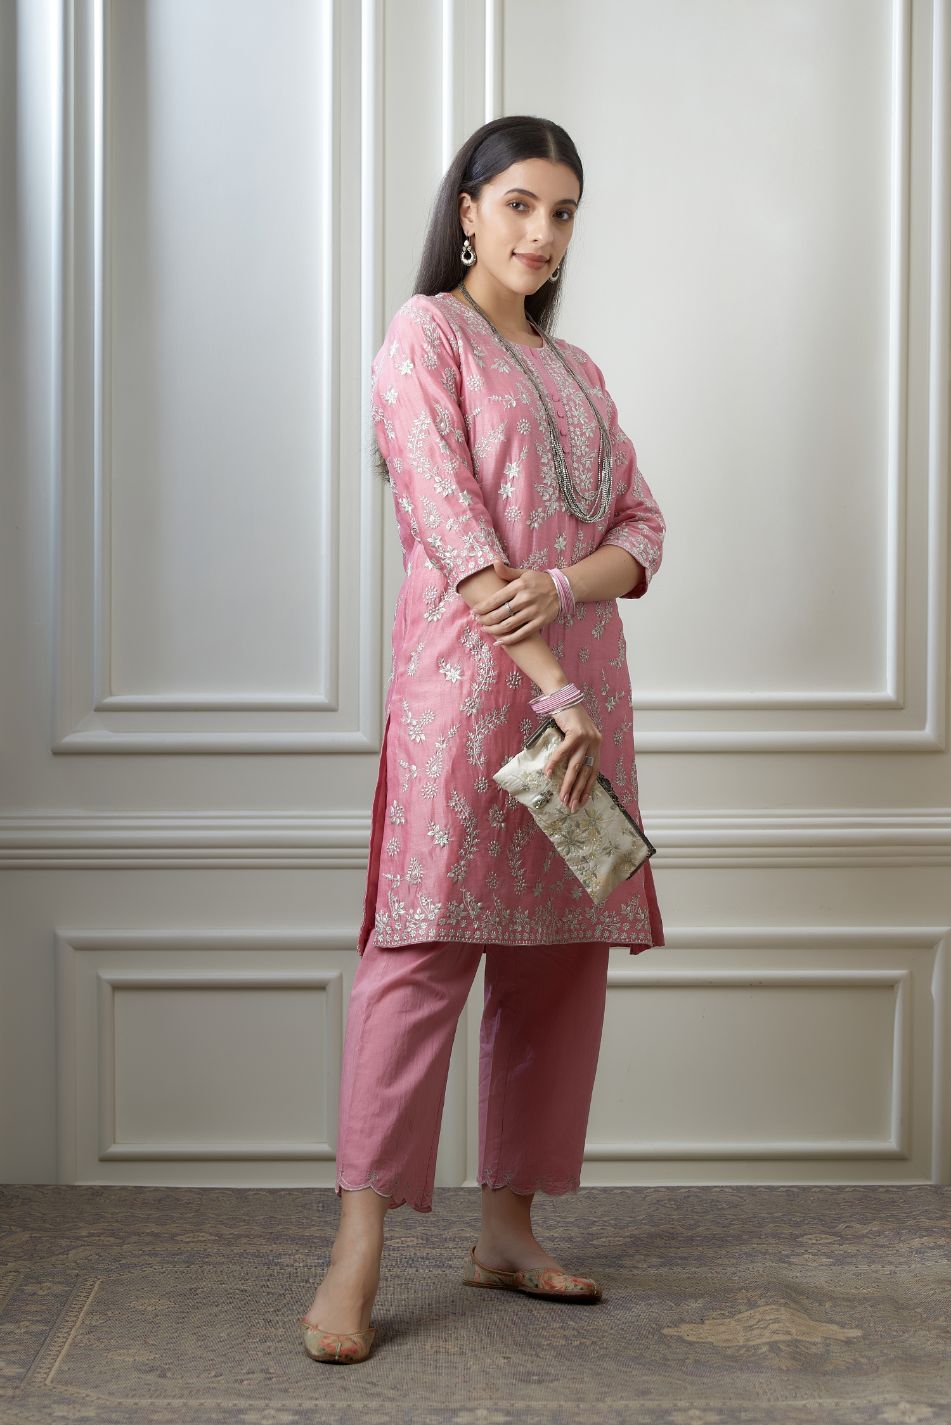 Lotus pink short kurta set highlighted with all-over silver zari embroidery